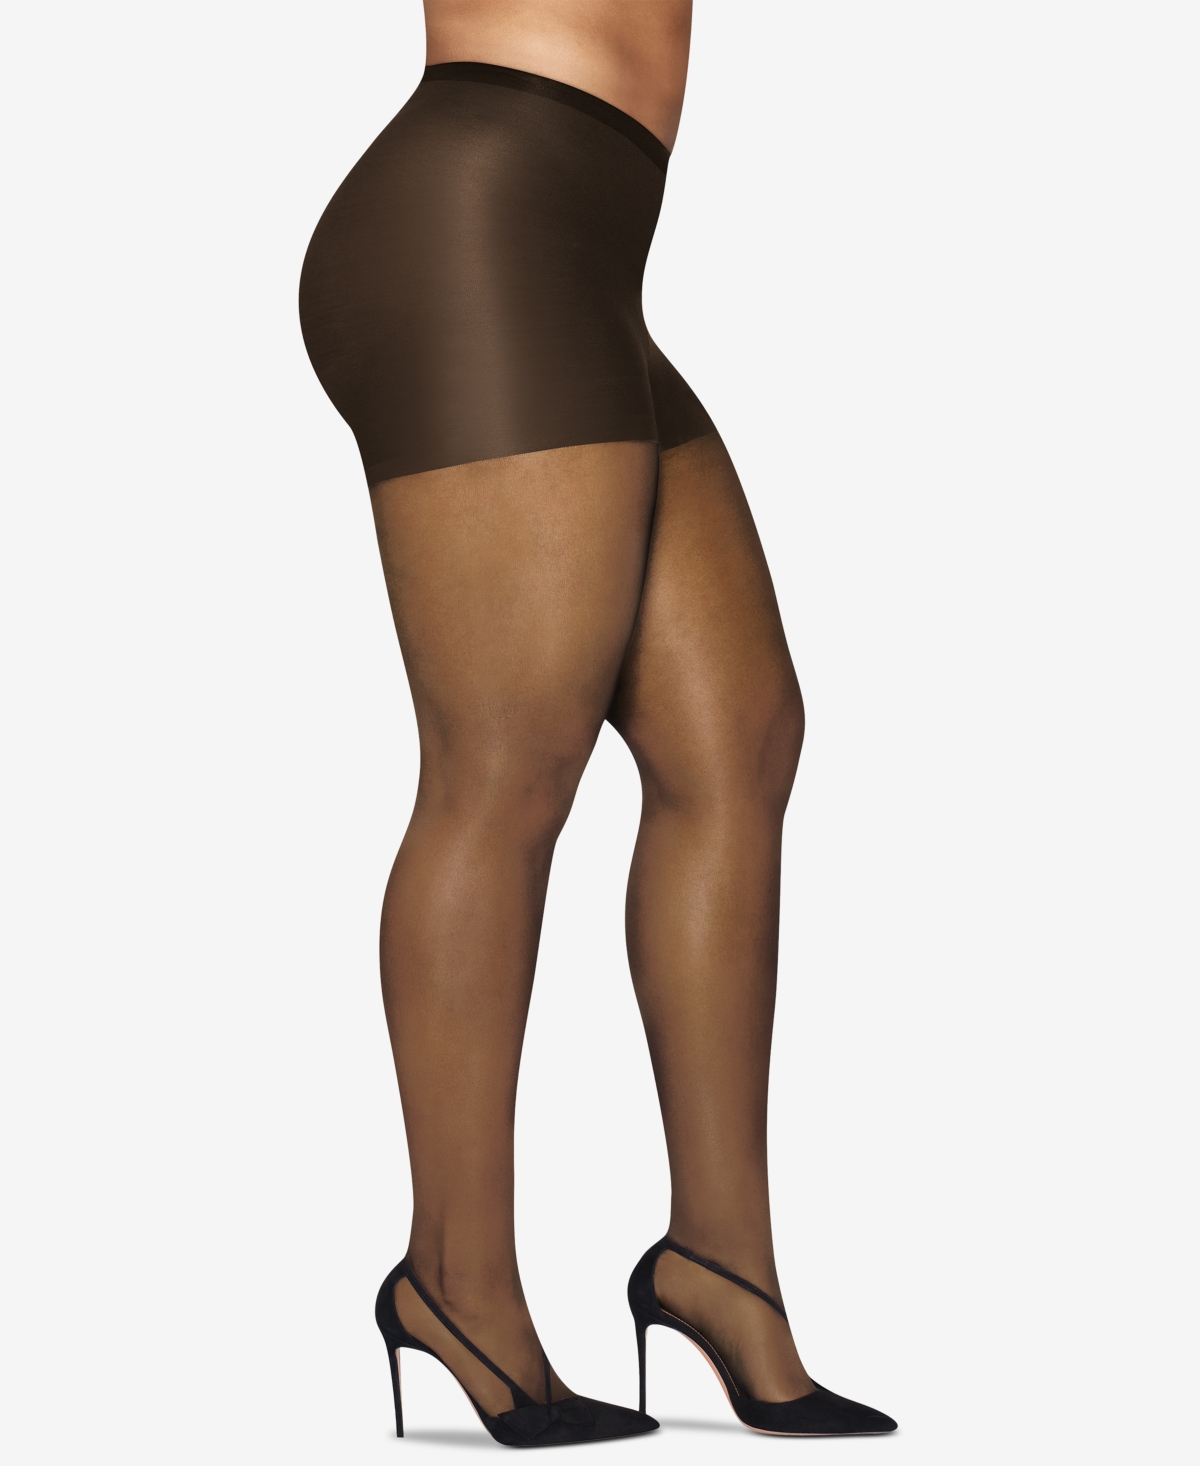 Hanes Curves Plus Size Silky Sheer Control Top Pantyhose